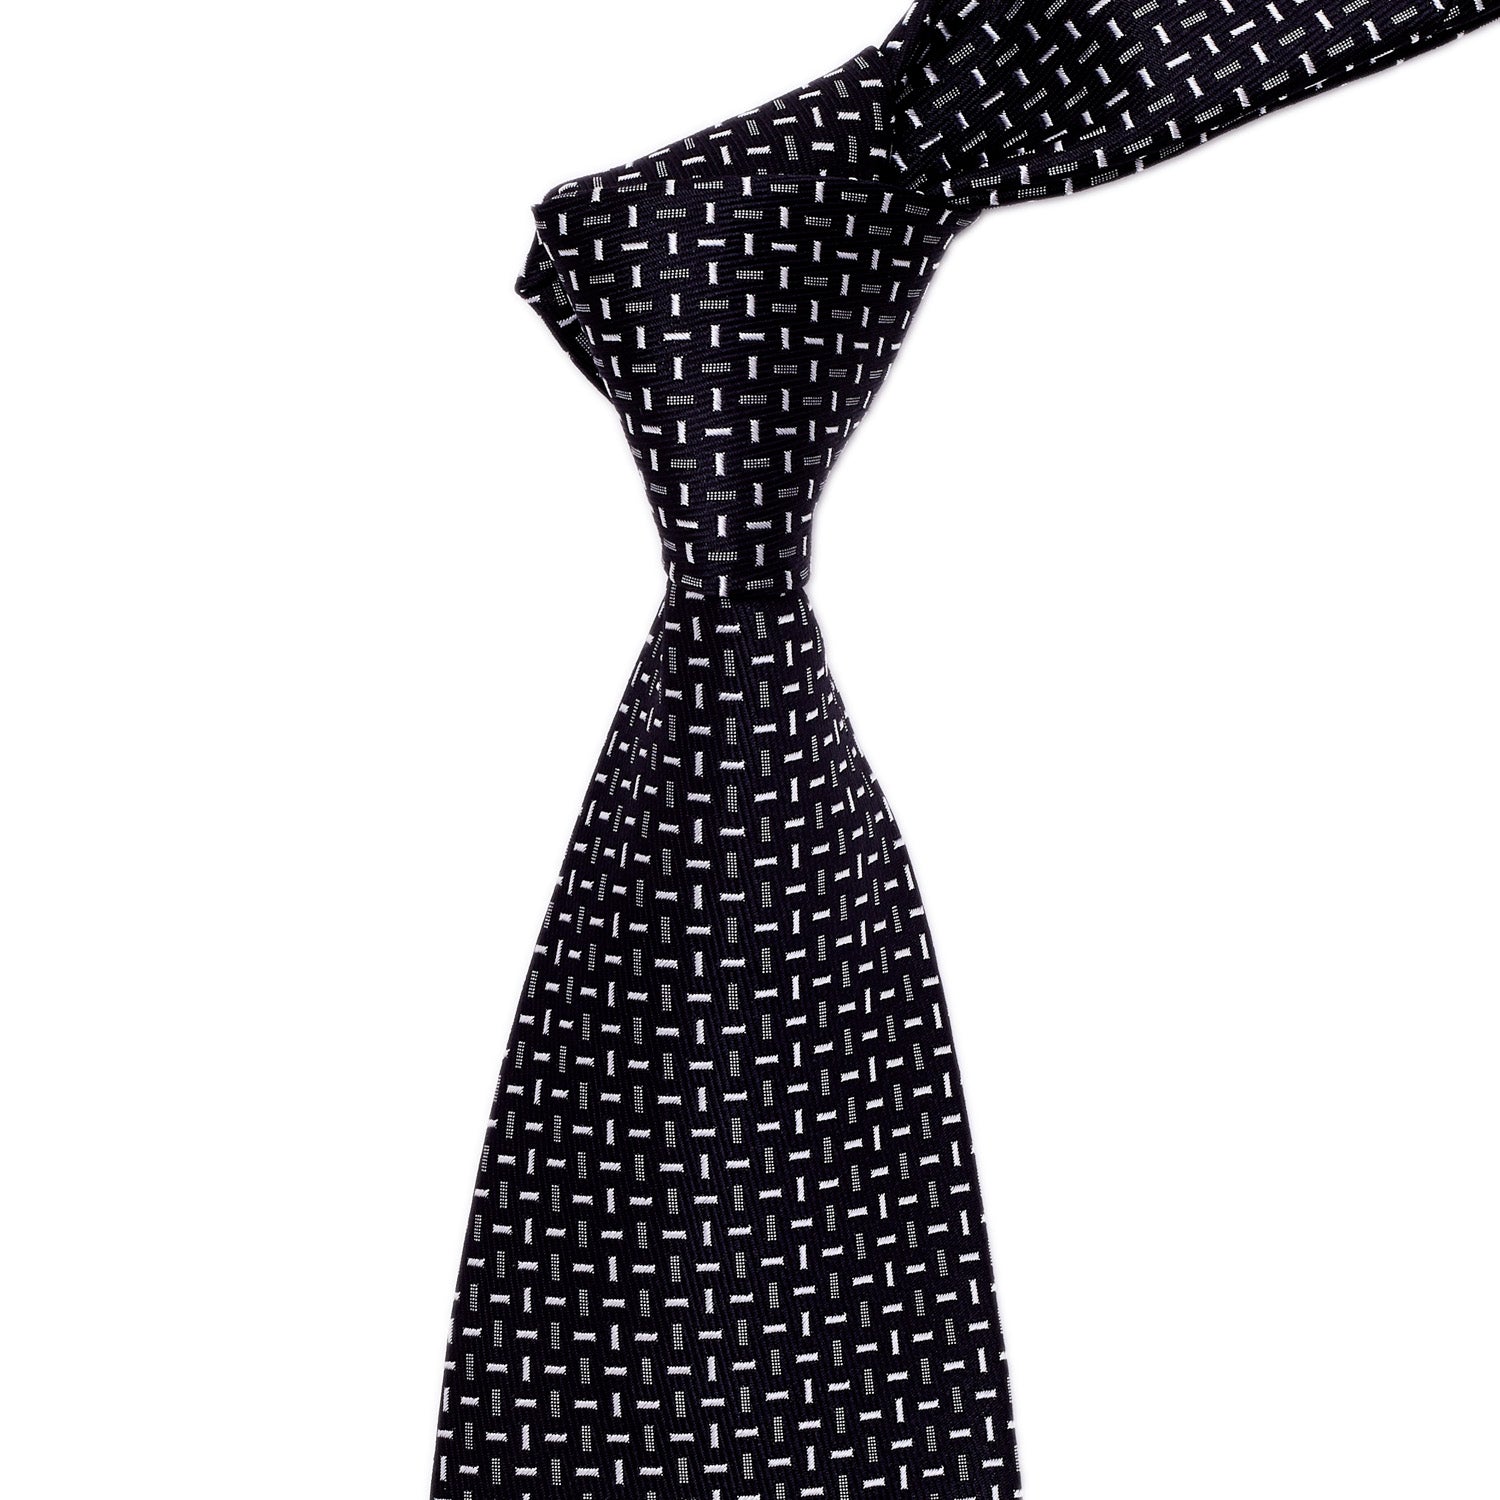 A Sovereign Grade Cross-Bar Jacquard Tie by KirbyAllison.com, handmade, black and white, on a white background.